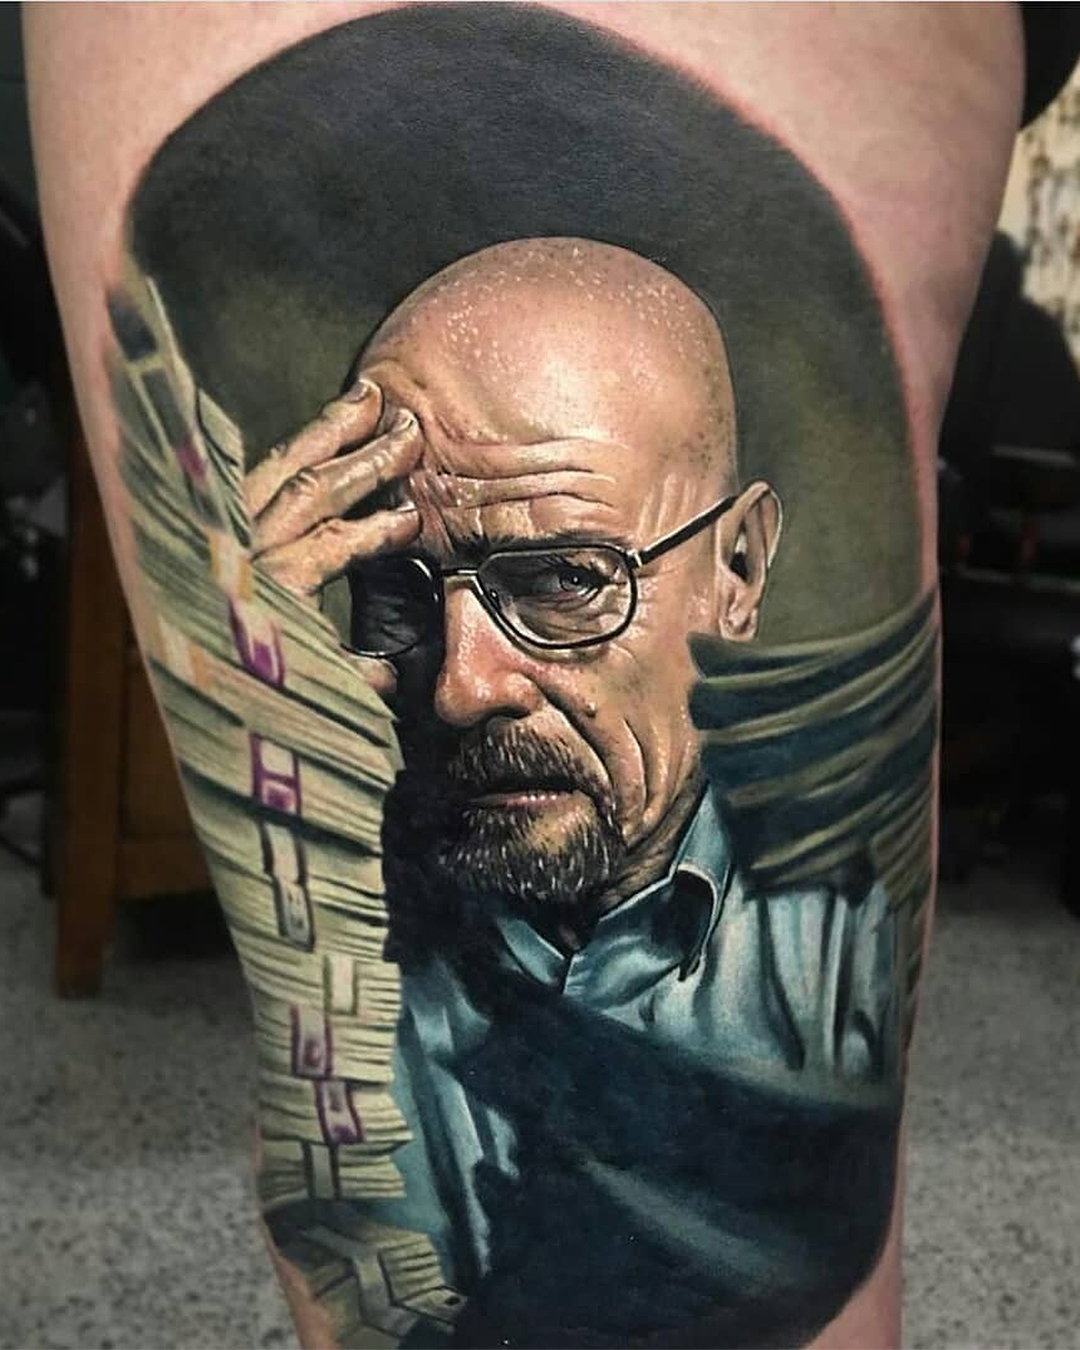 An incredibly realistic portrait of Heisenberg.